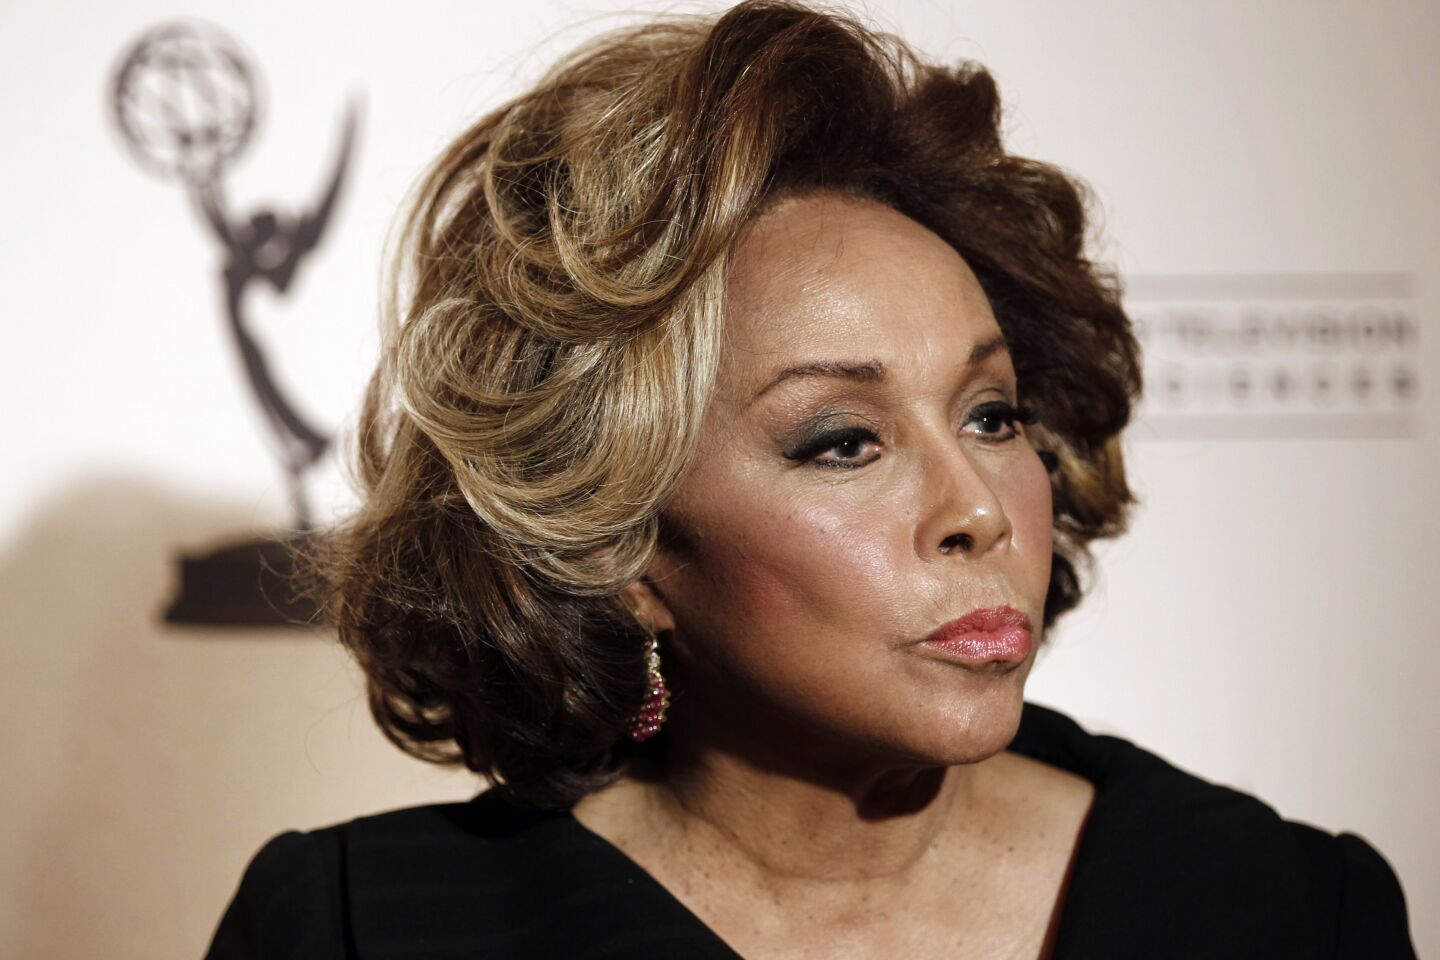 Diahann Carroll changed the course of television history as the first African American woman to be cast as a professional in 1968’s groundbreaking sitcom “Julia." One of the first black actresses to star in studio films, Carroll was nominated for a lead actress Oscar for her turn as a welfare mom in the 1974 comedy “Claudine.” In 1962, she earned a Tony Award for Richard Rodgers’ “No Strings.” She was 84.